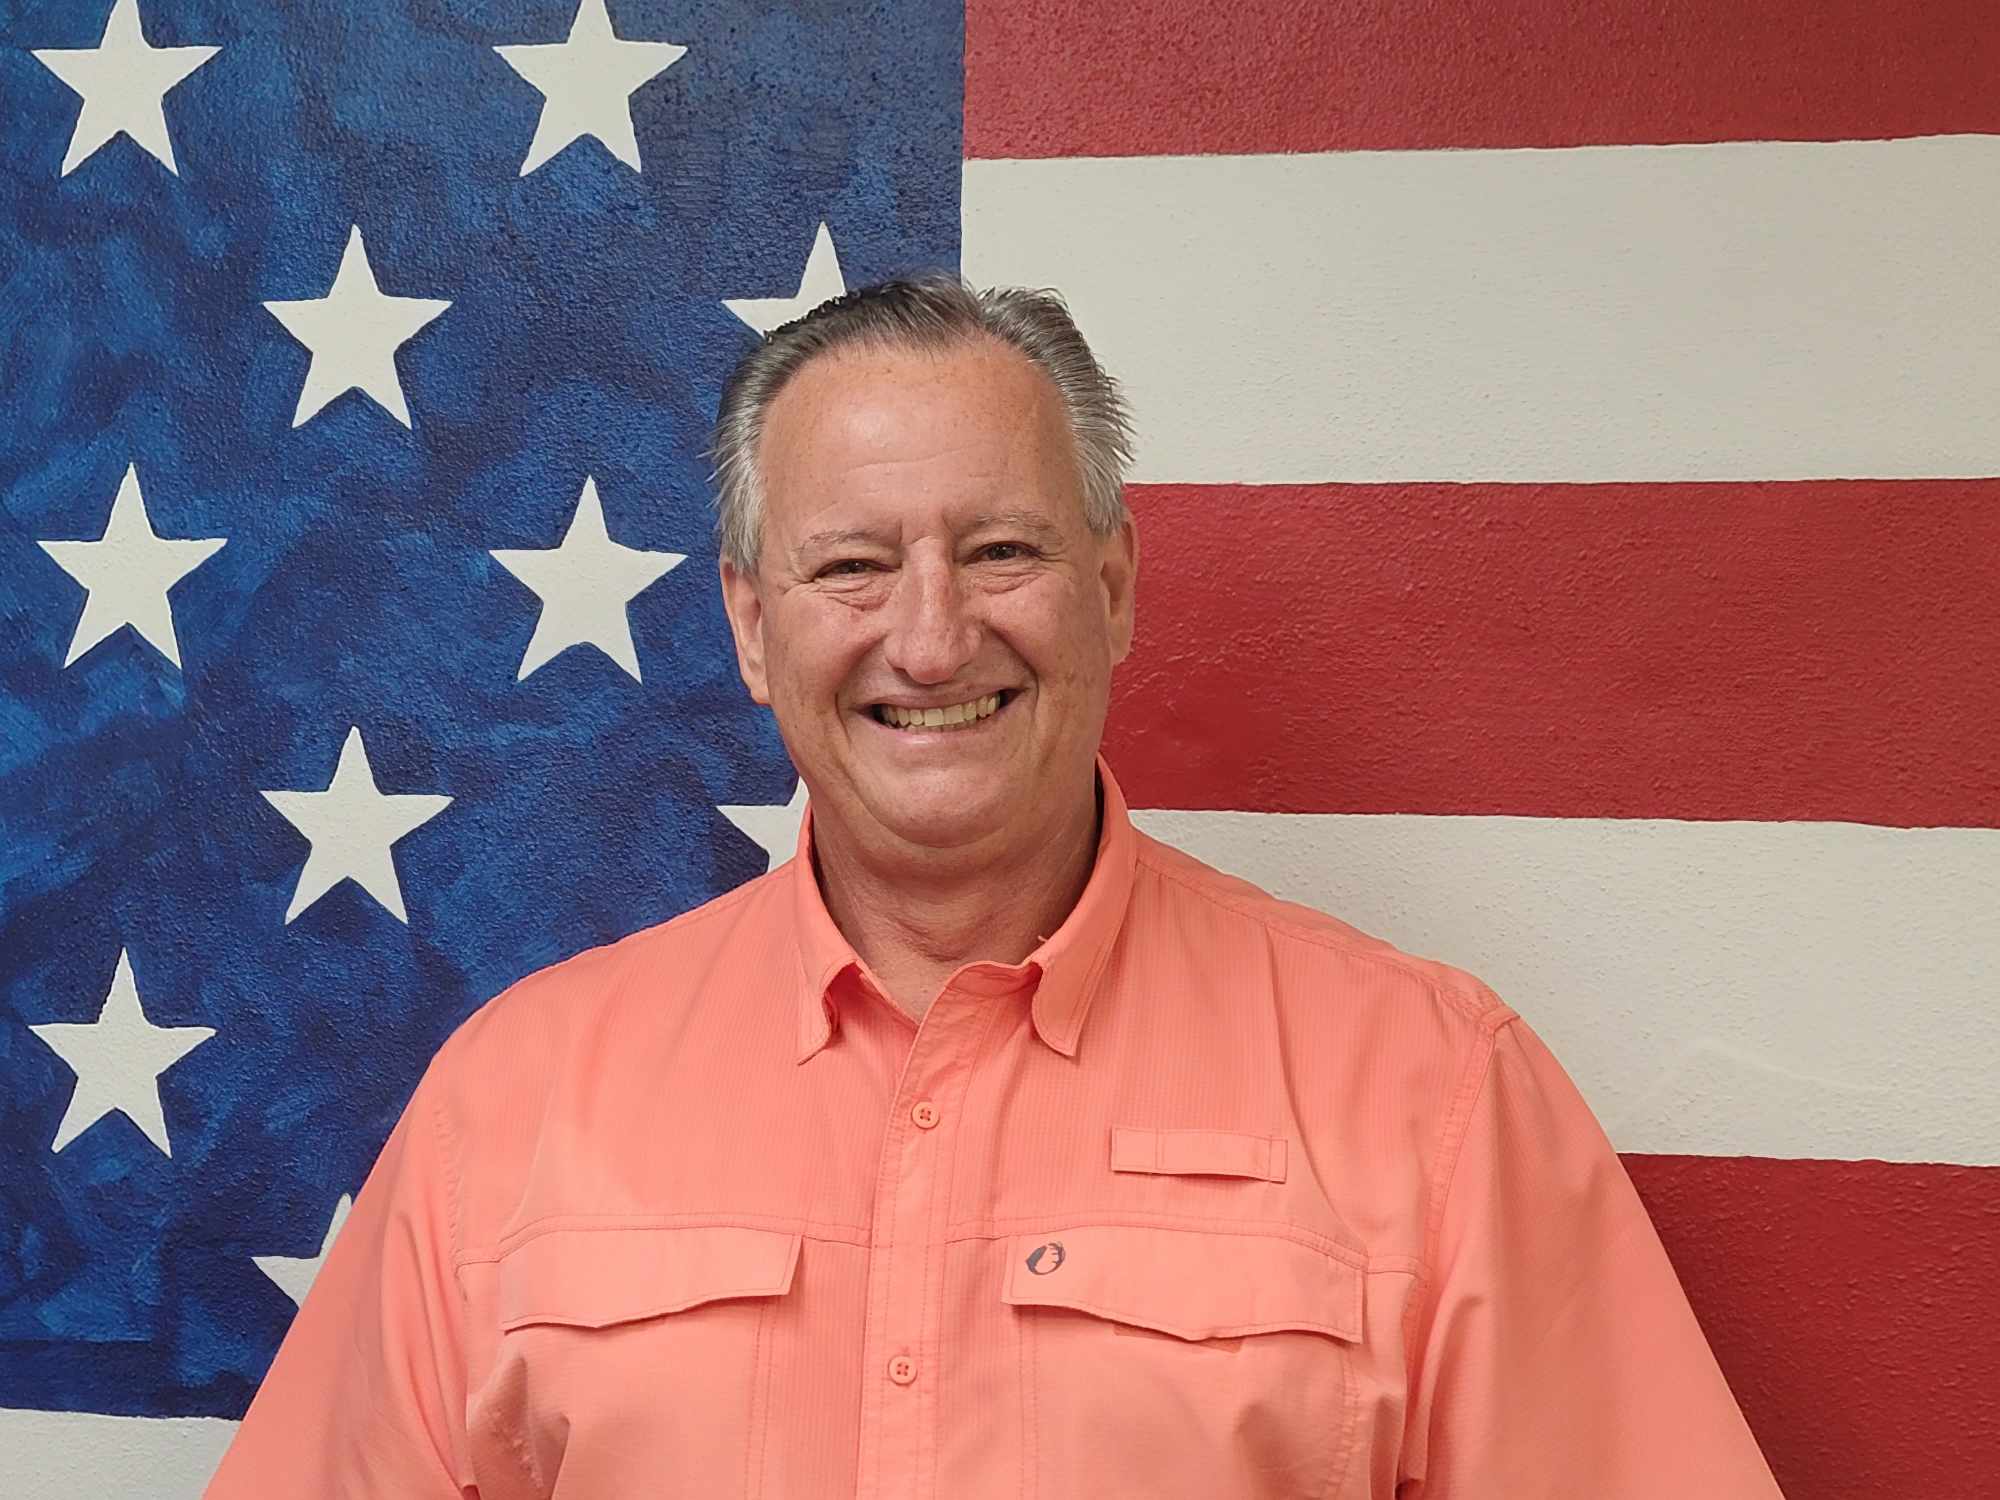 A man in an orange shirt standing next to the american flag.